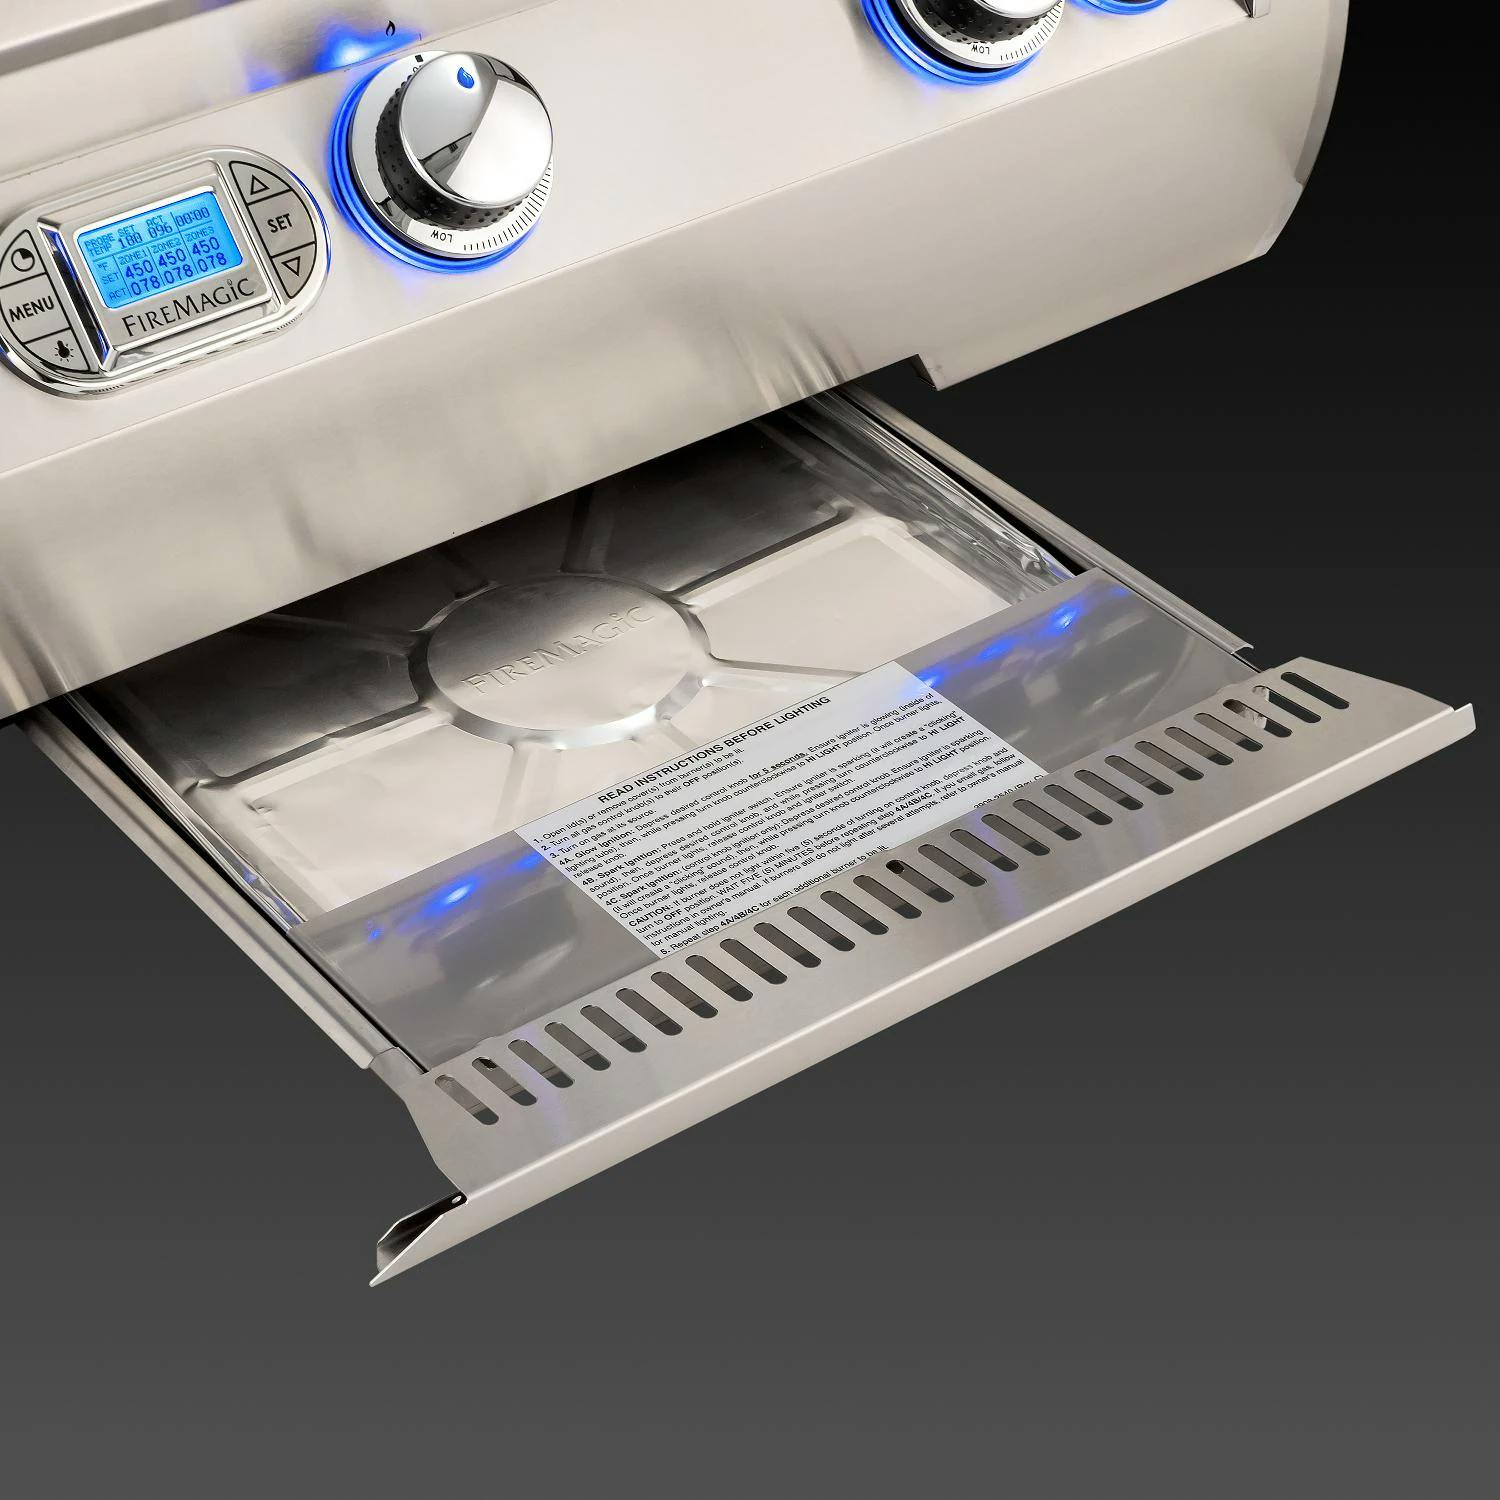 Fire Magic Echelon Diamond Built-in Gas Grill with Rotisserie and Digital Thermometer · 36 in. · Natural Gas